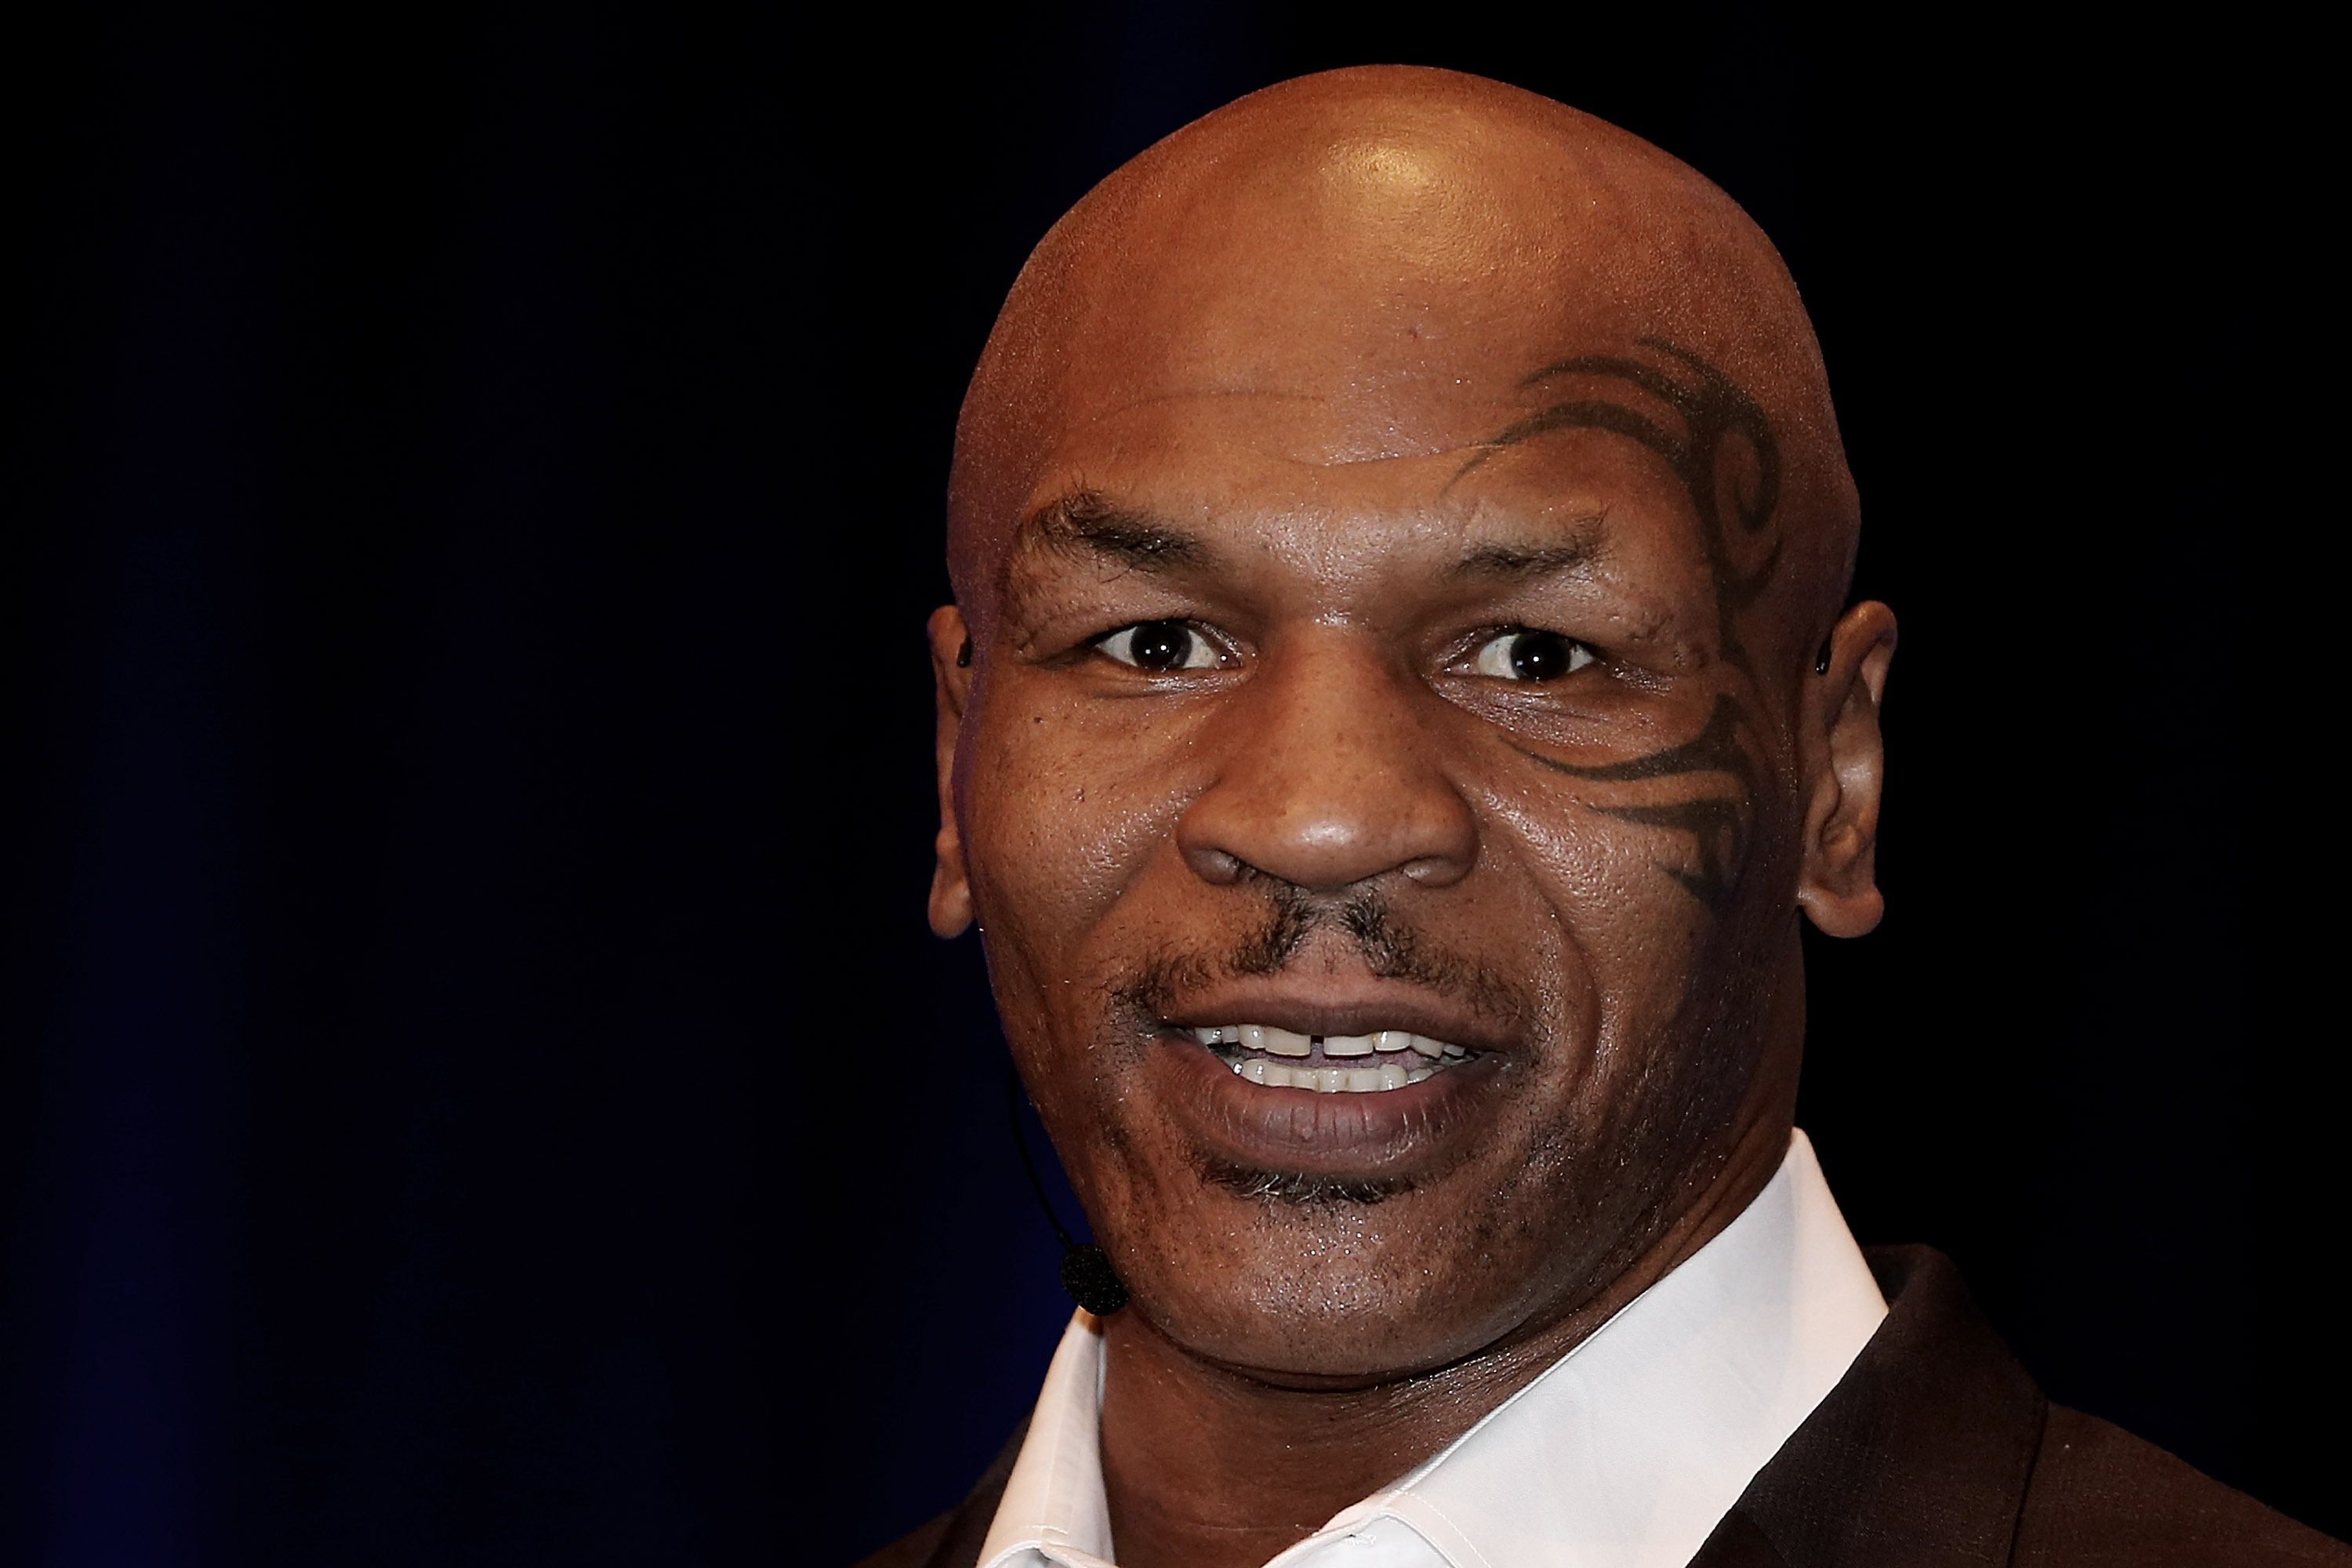 Boxer Mike tyson wallpapers and images - wallpapers, pictures, photos